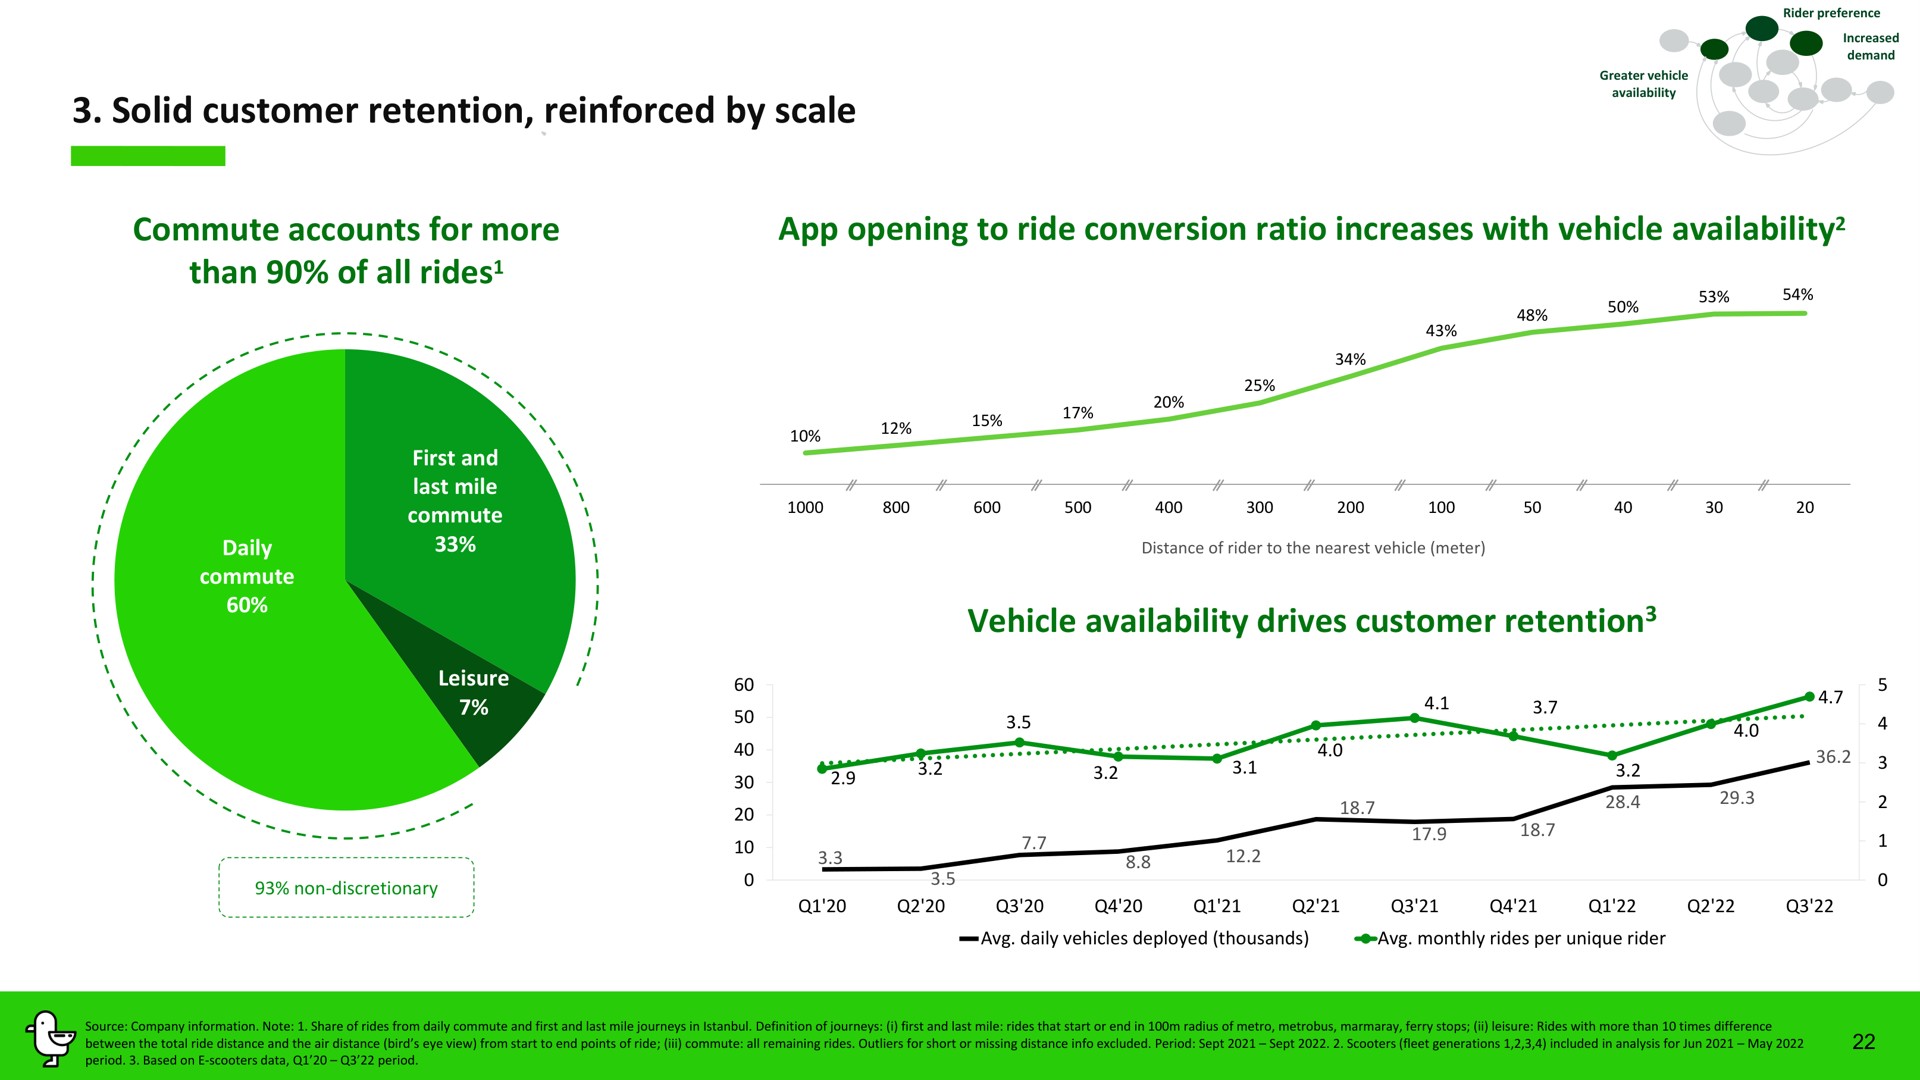 solid customer retention reinforced by scale commute accounts for more than of all rides opening to ride conversion ratio increases with vehicle availability vehicle availability drives customer retention rides | Marti